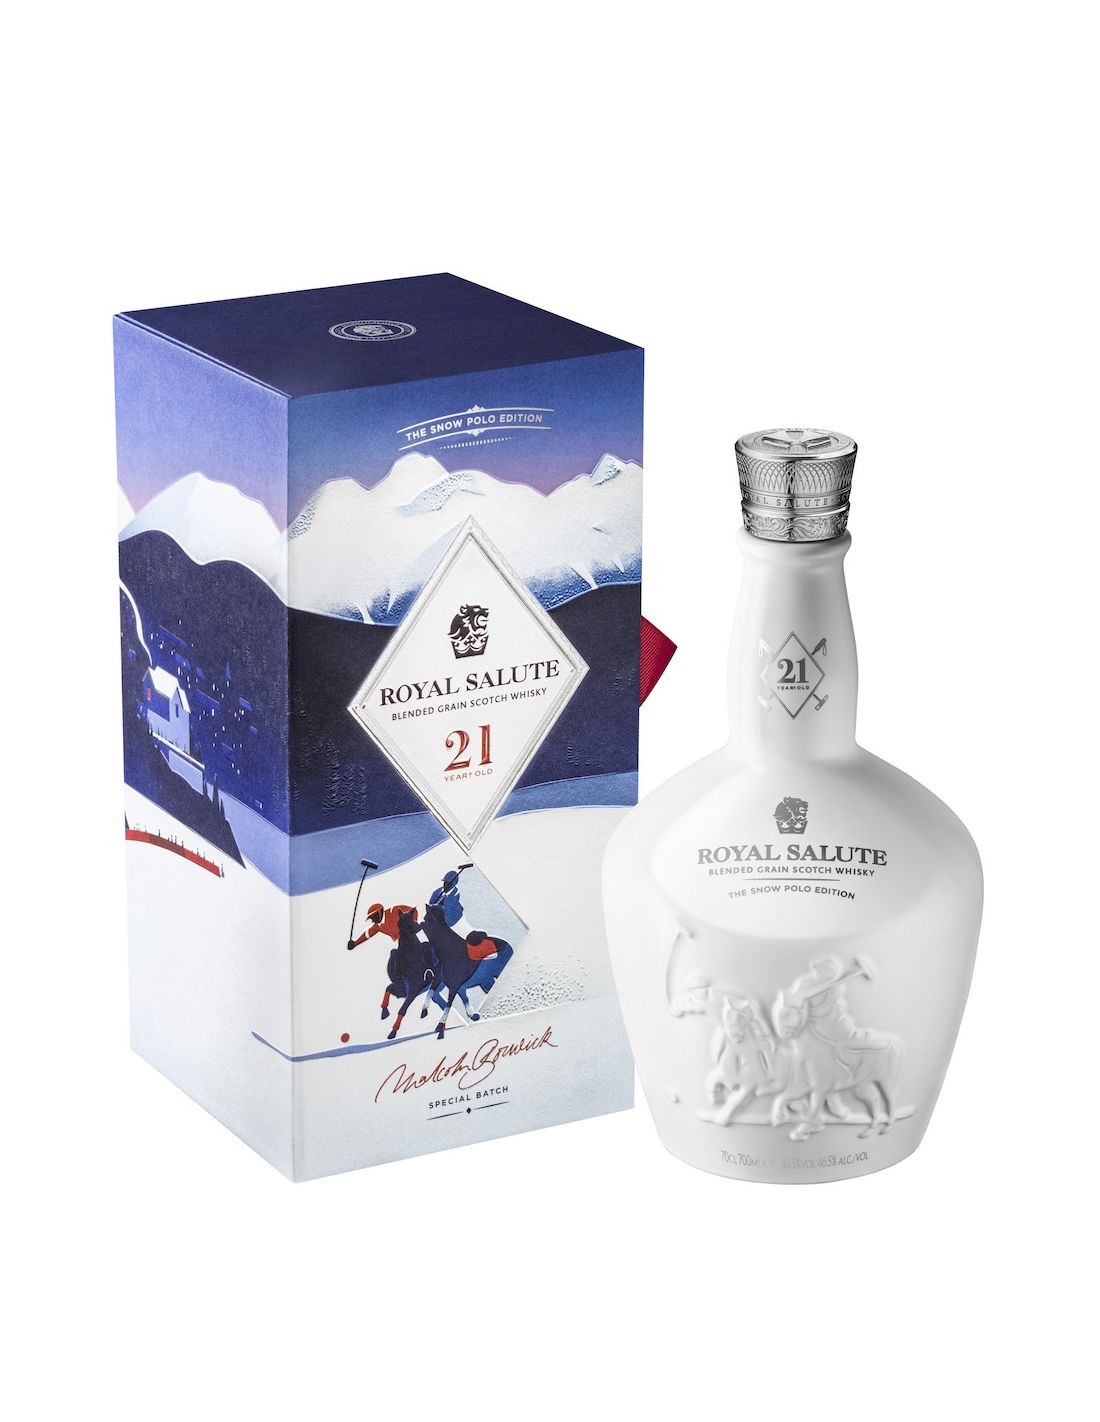 WHISKY ROYAL SALUTE 21 years SNOW POLO EDITION - 46.5% - 70 CL